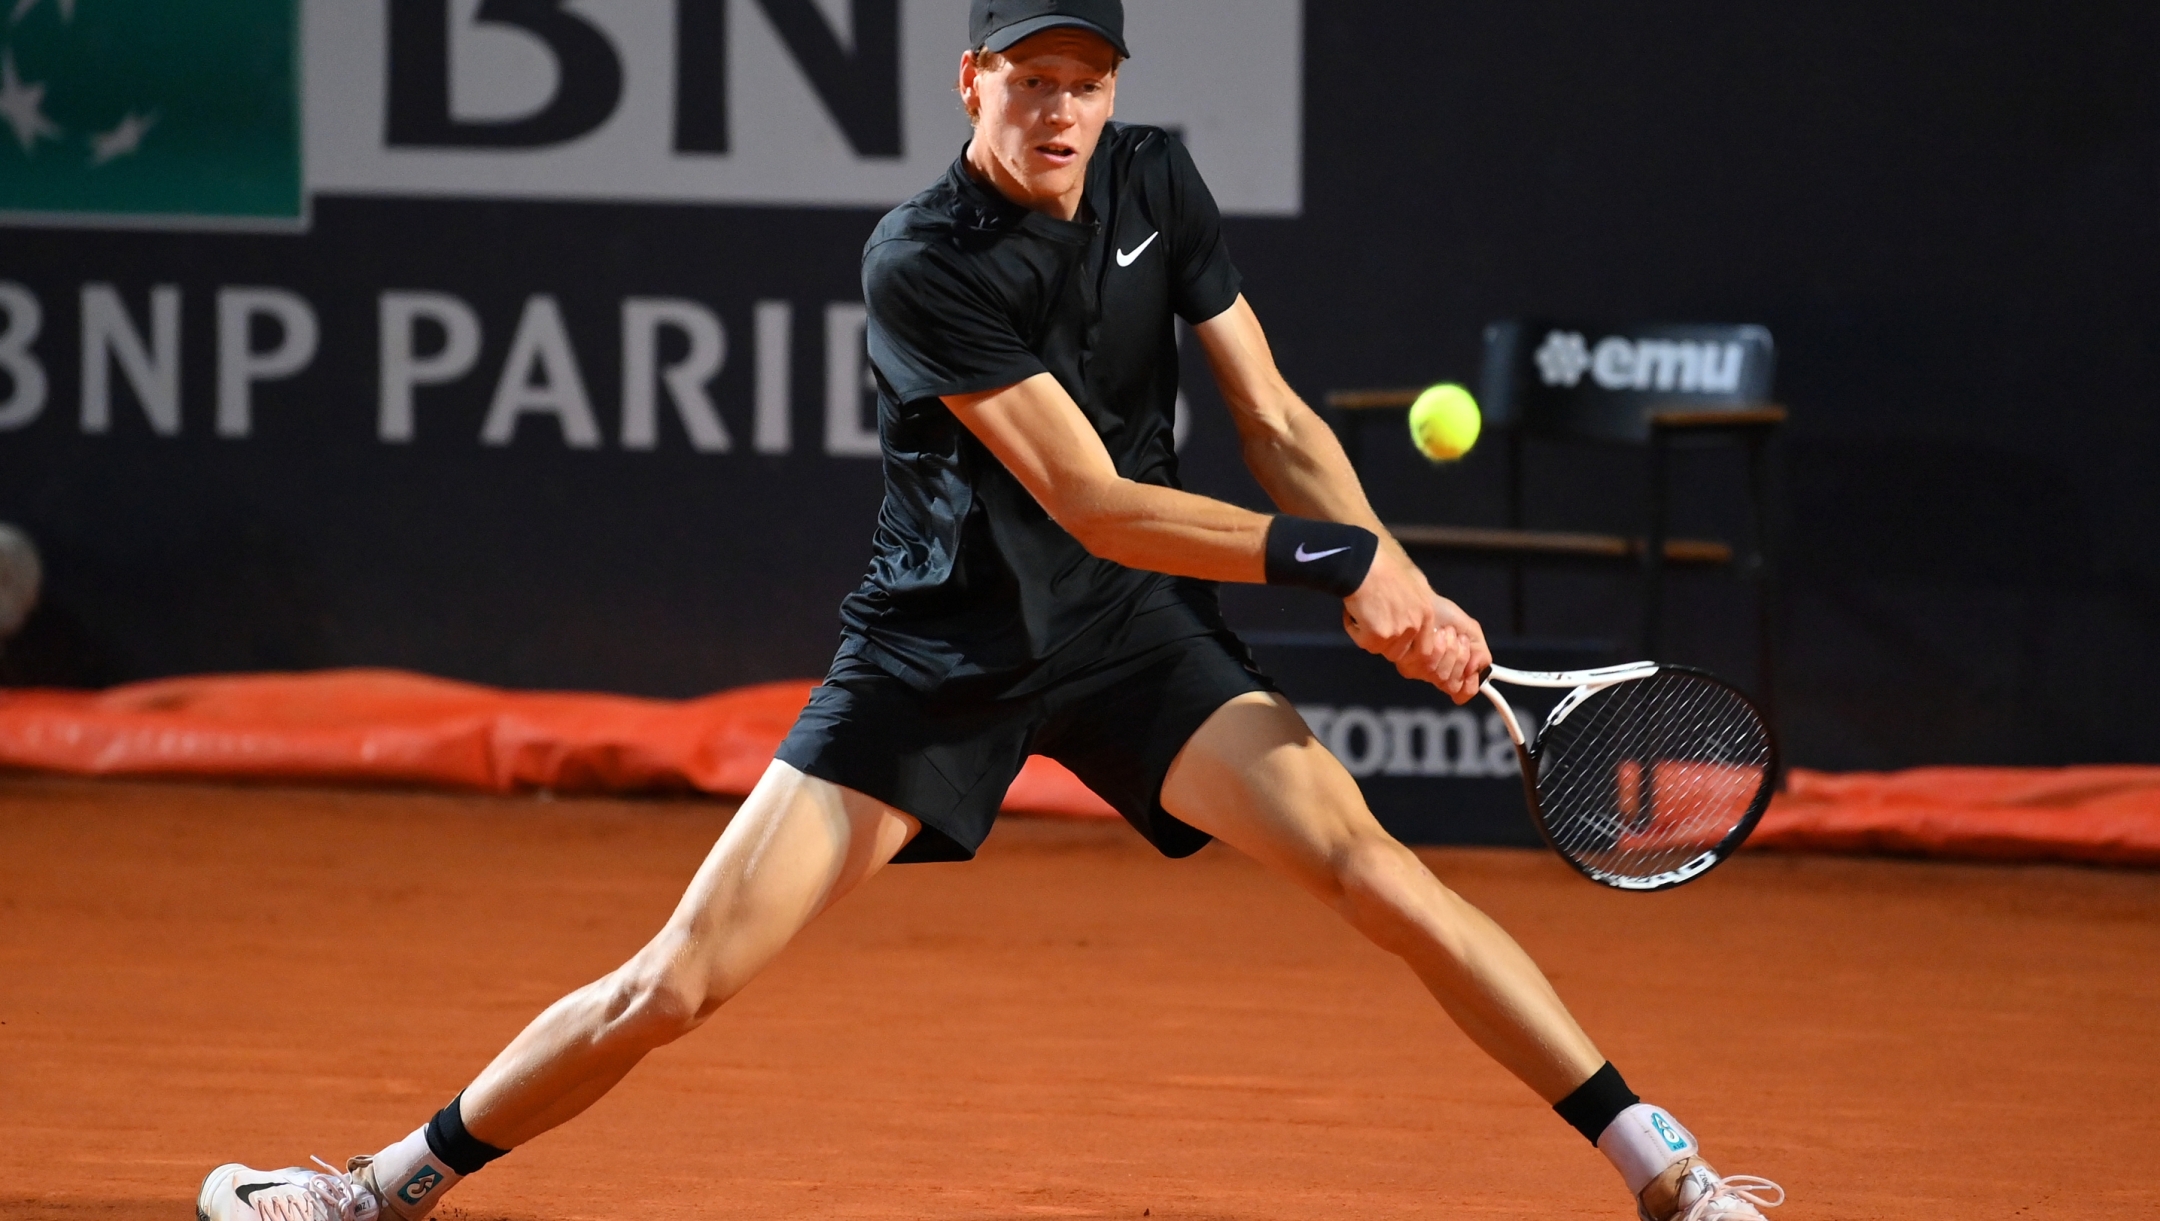 ROME, ITALY - MAY 14: Jannik Sinner of Italy plays a backhand against Alexander Shevchenko during the Men's Singles Third Round match during Day Seven of the Internazionali BNL D'Italia 2023 at Foro Italico on May 14, 2023 in Rome, Italy. (Photo by Justin Setterfield/Getty Images)